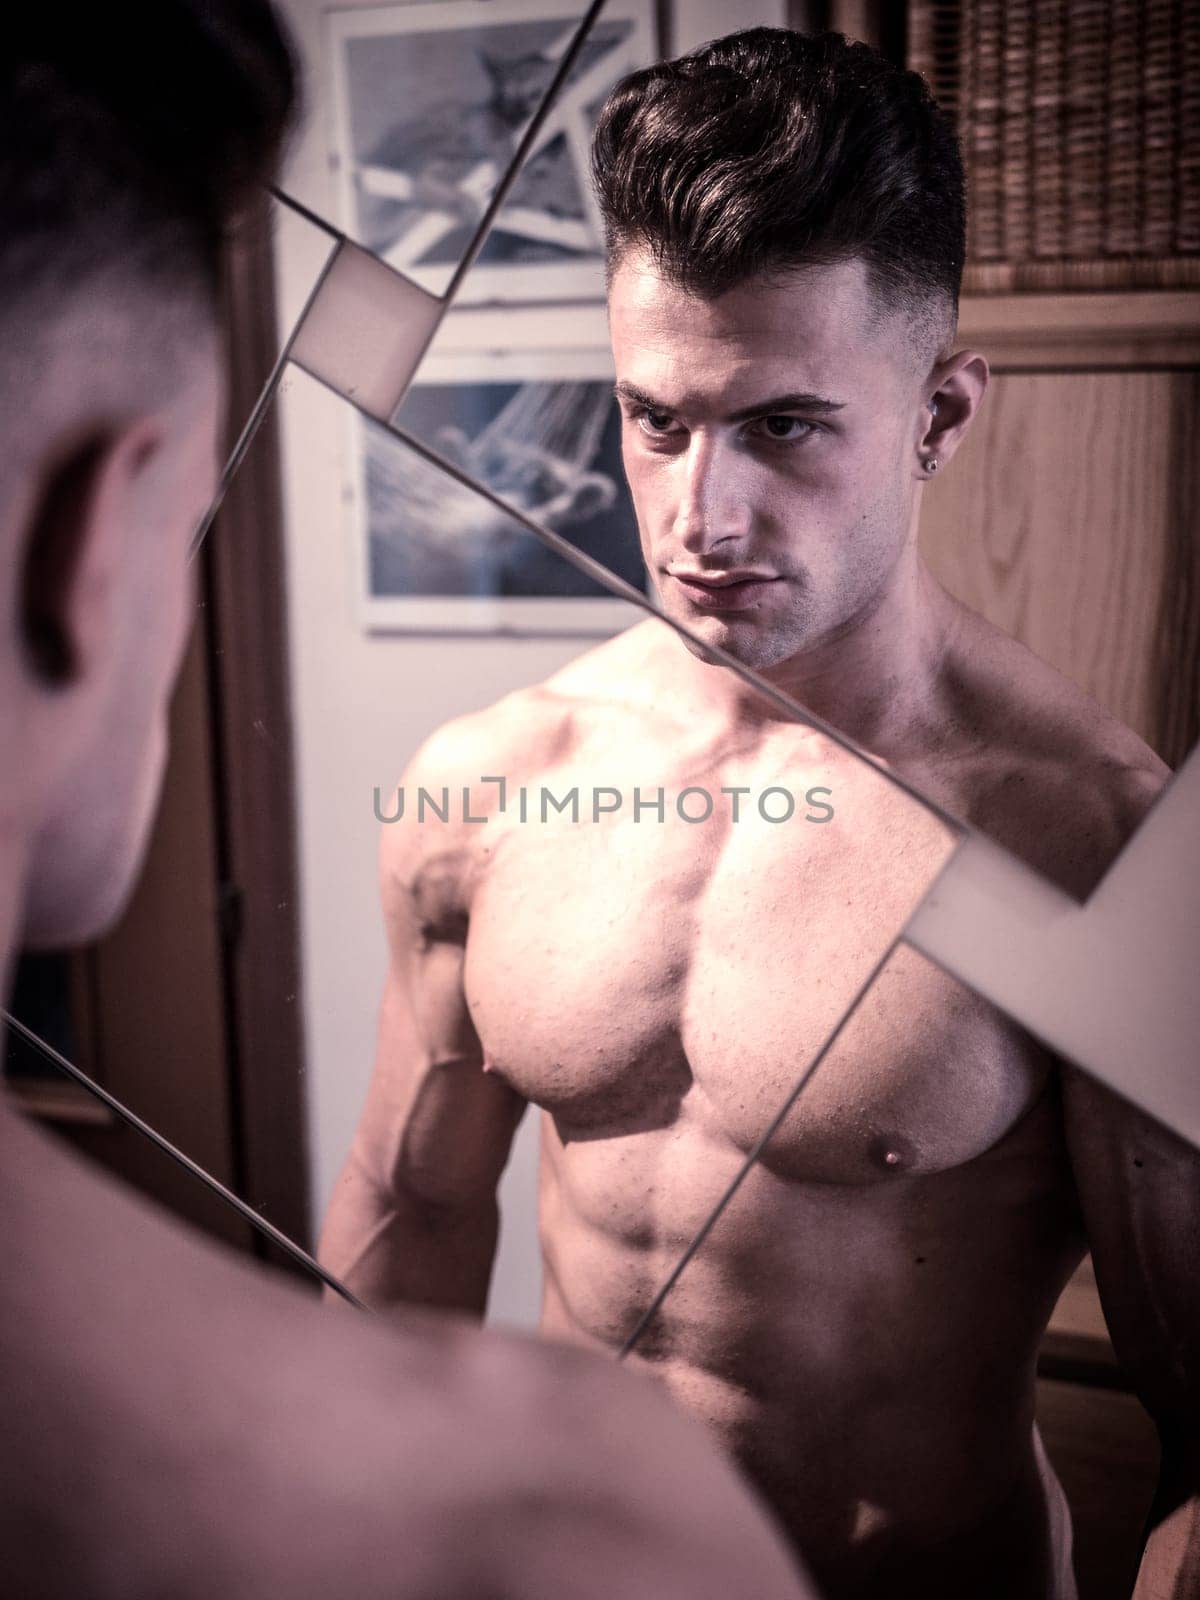 Photo of a shirtless man admiring his reflection in the mirror by artofphoto